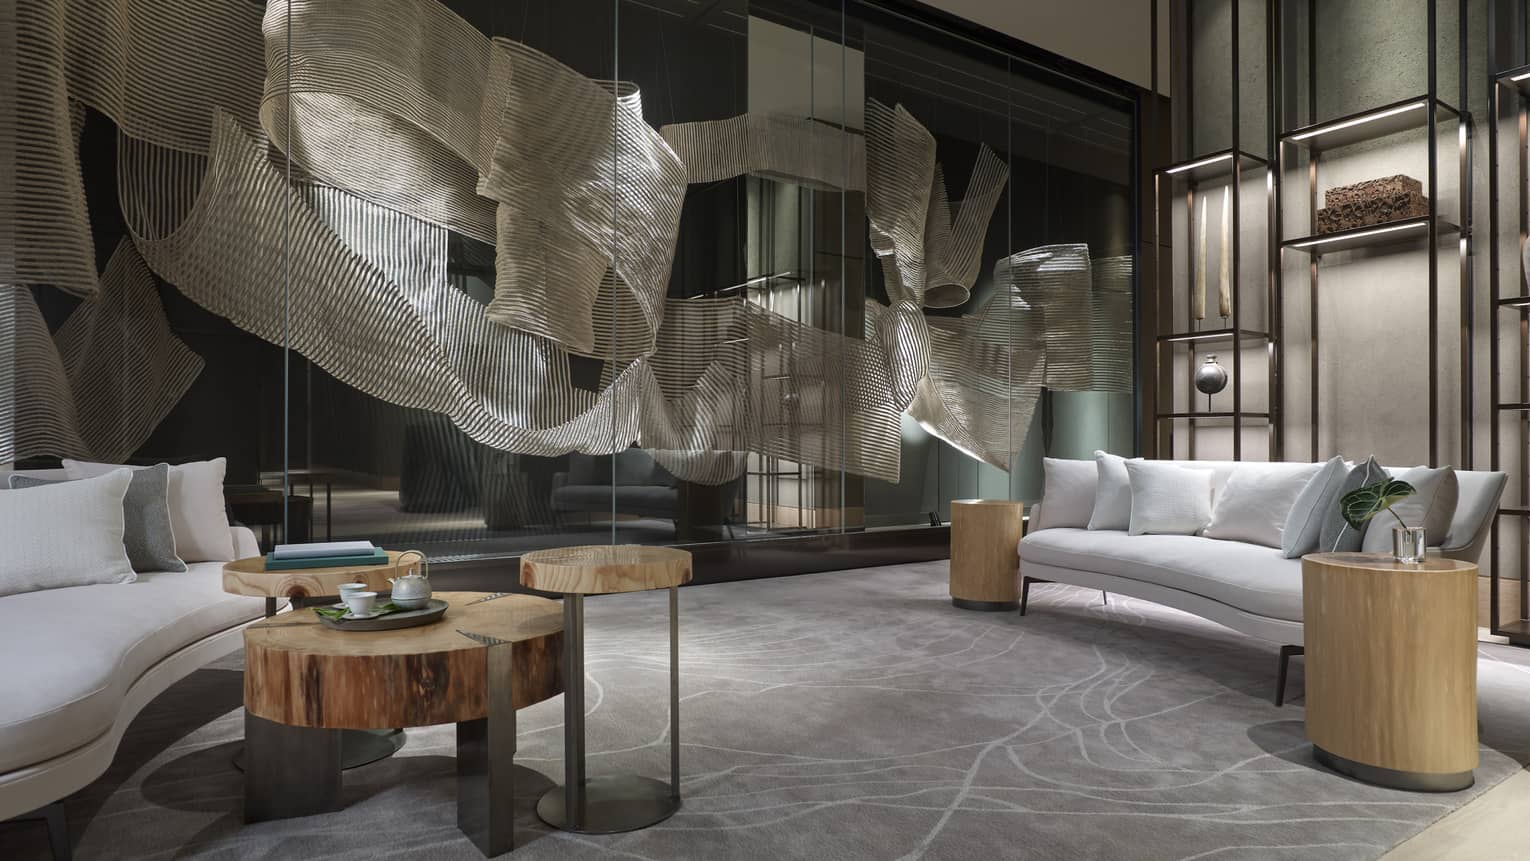 Jean-Michel Gathy's artwork made of natural thin ropes and clear synthetic lines at the entrance to five private spa treatment rooms